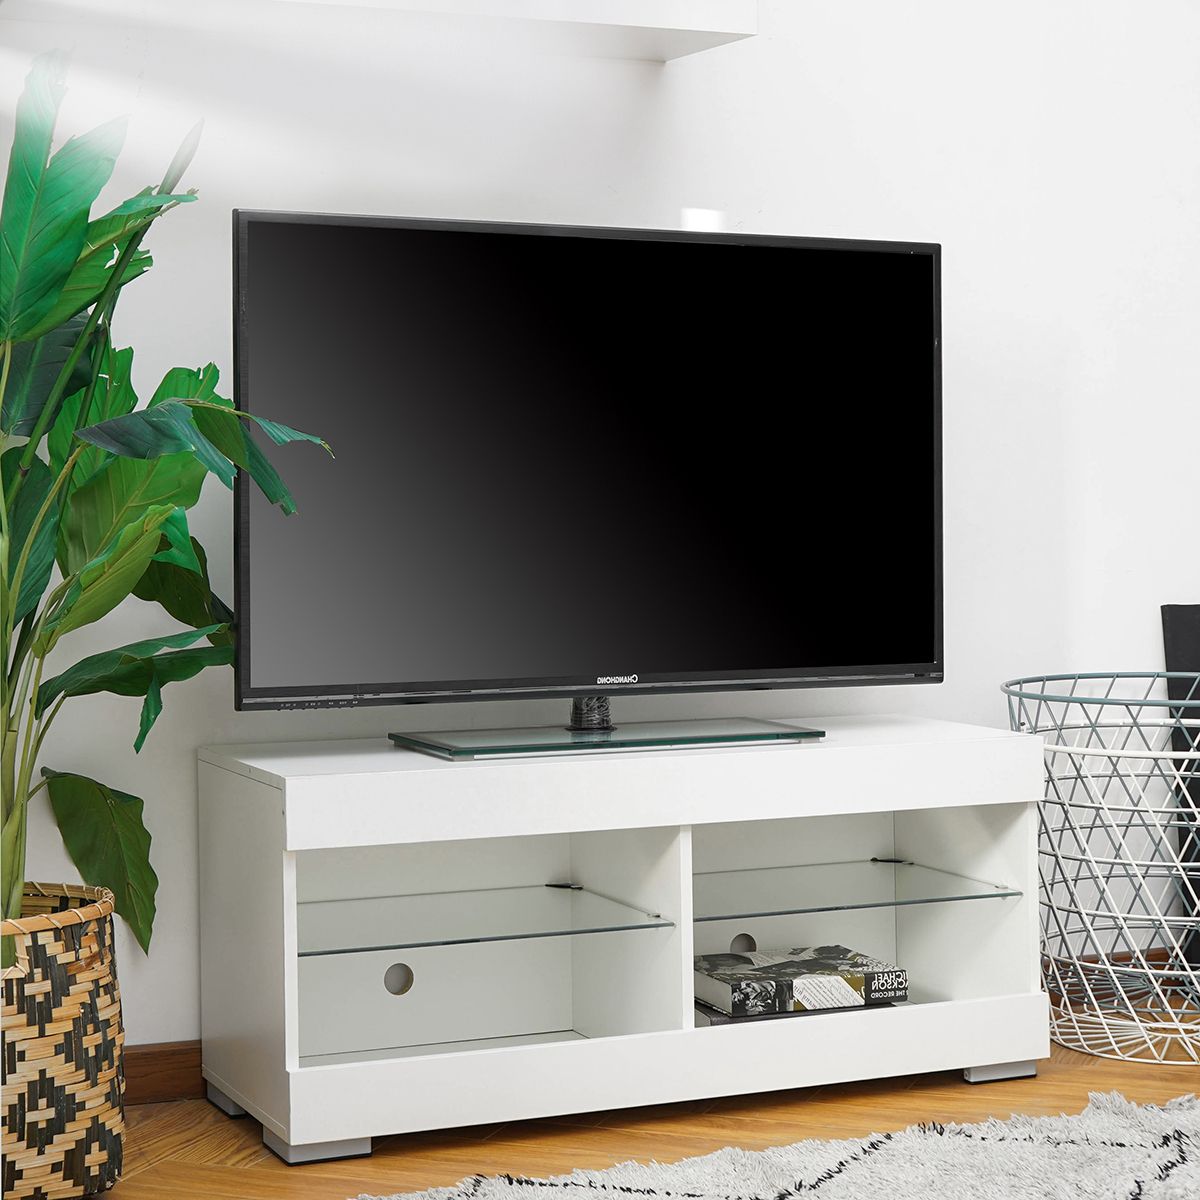 Most Popular Wood Television Stand Modern Tv Stand Cabinet With Led Inside Glass Shelves Tv Stands (View 2 of 10)